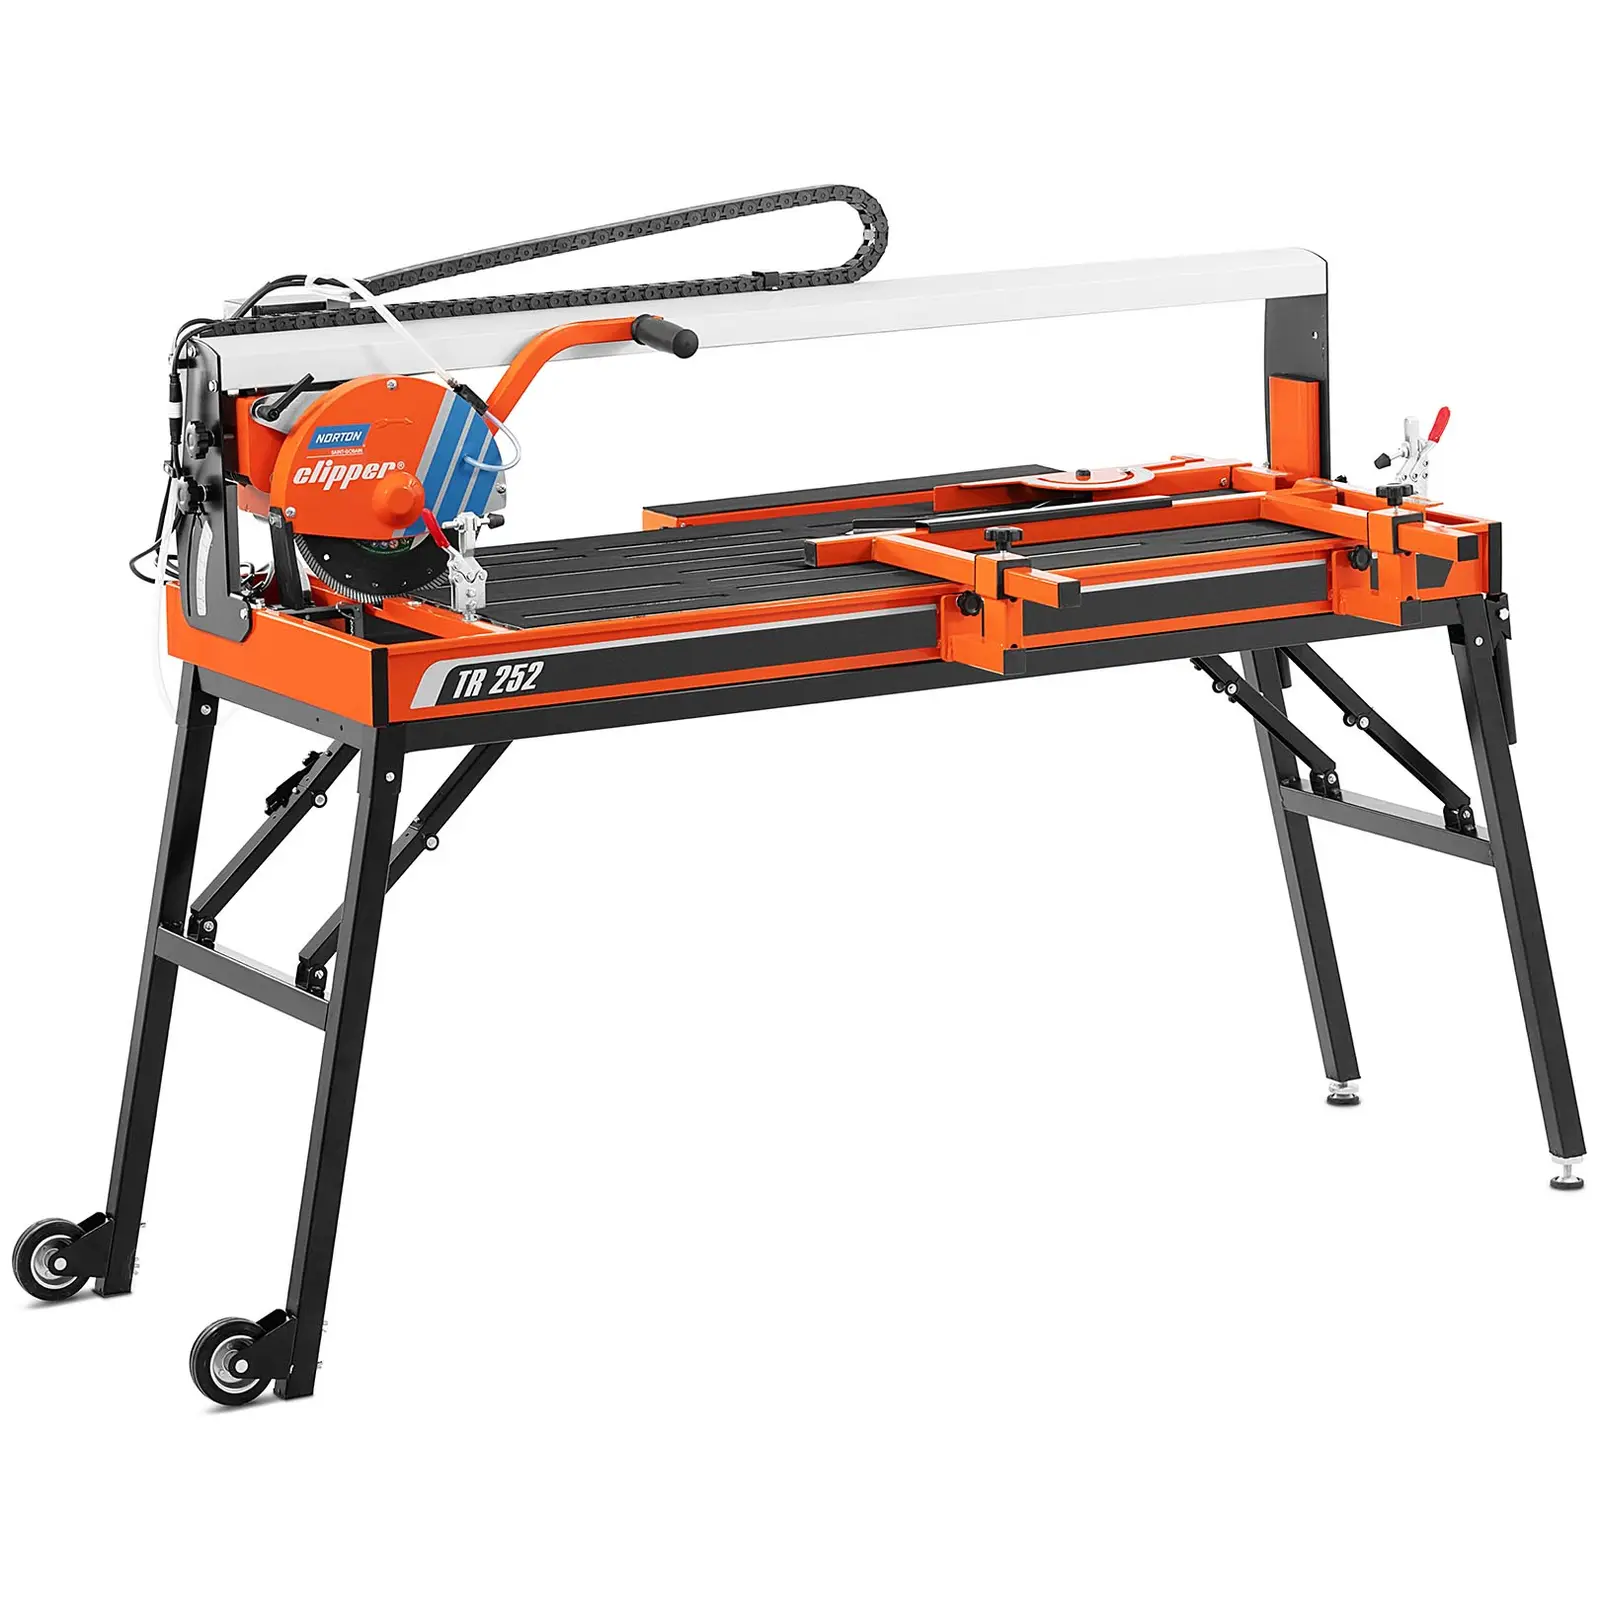 Tile Cutter - 1,500 W - cutting length: 1,200 mm - water-cooled